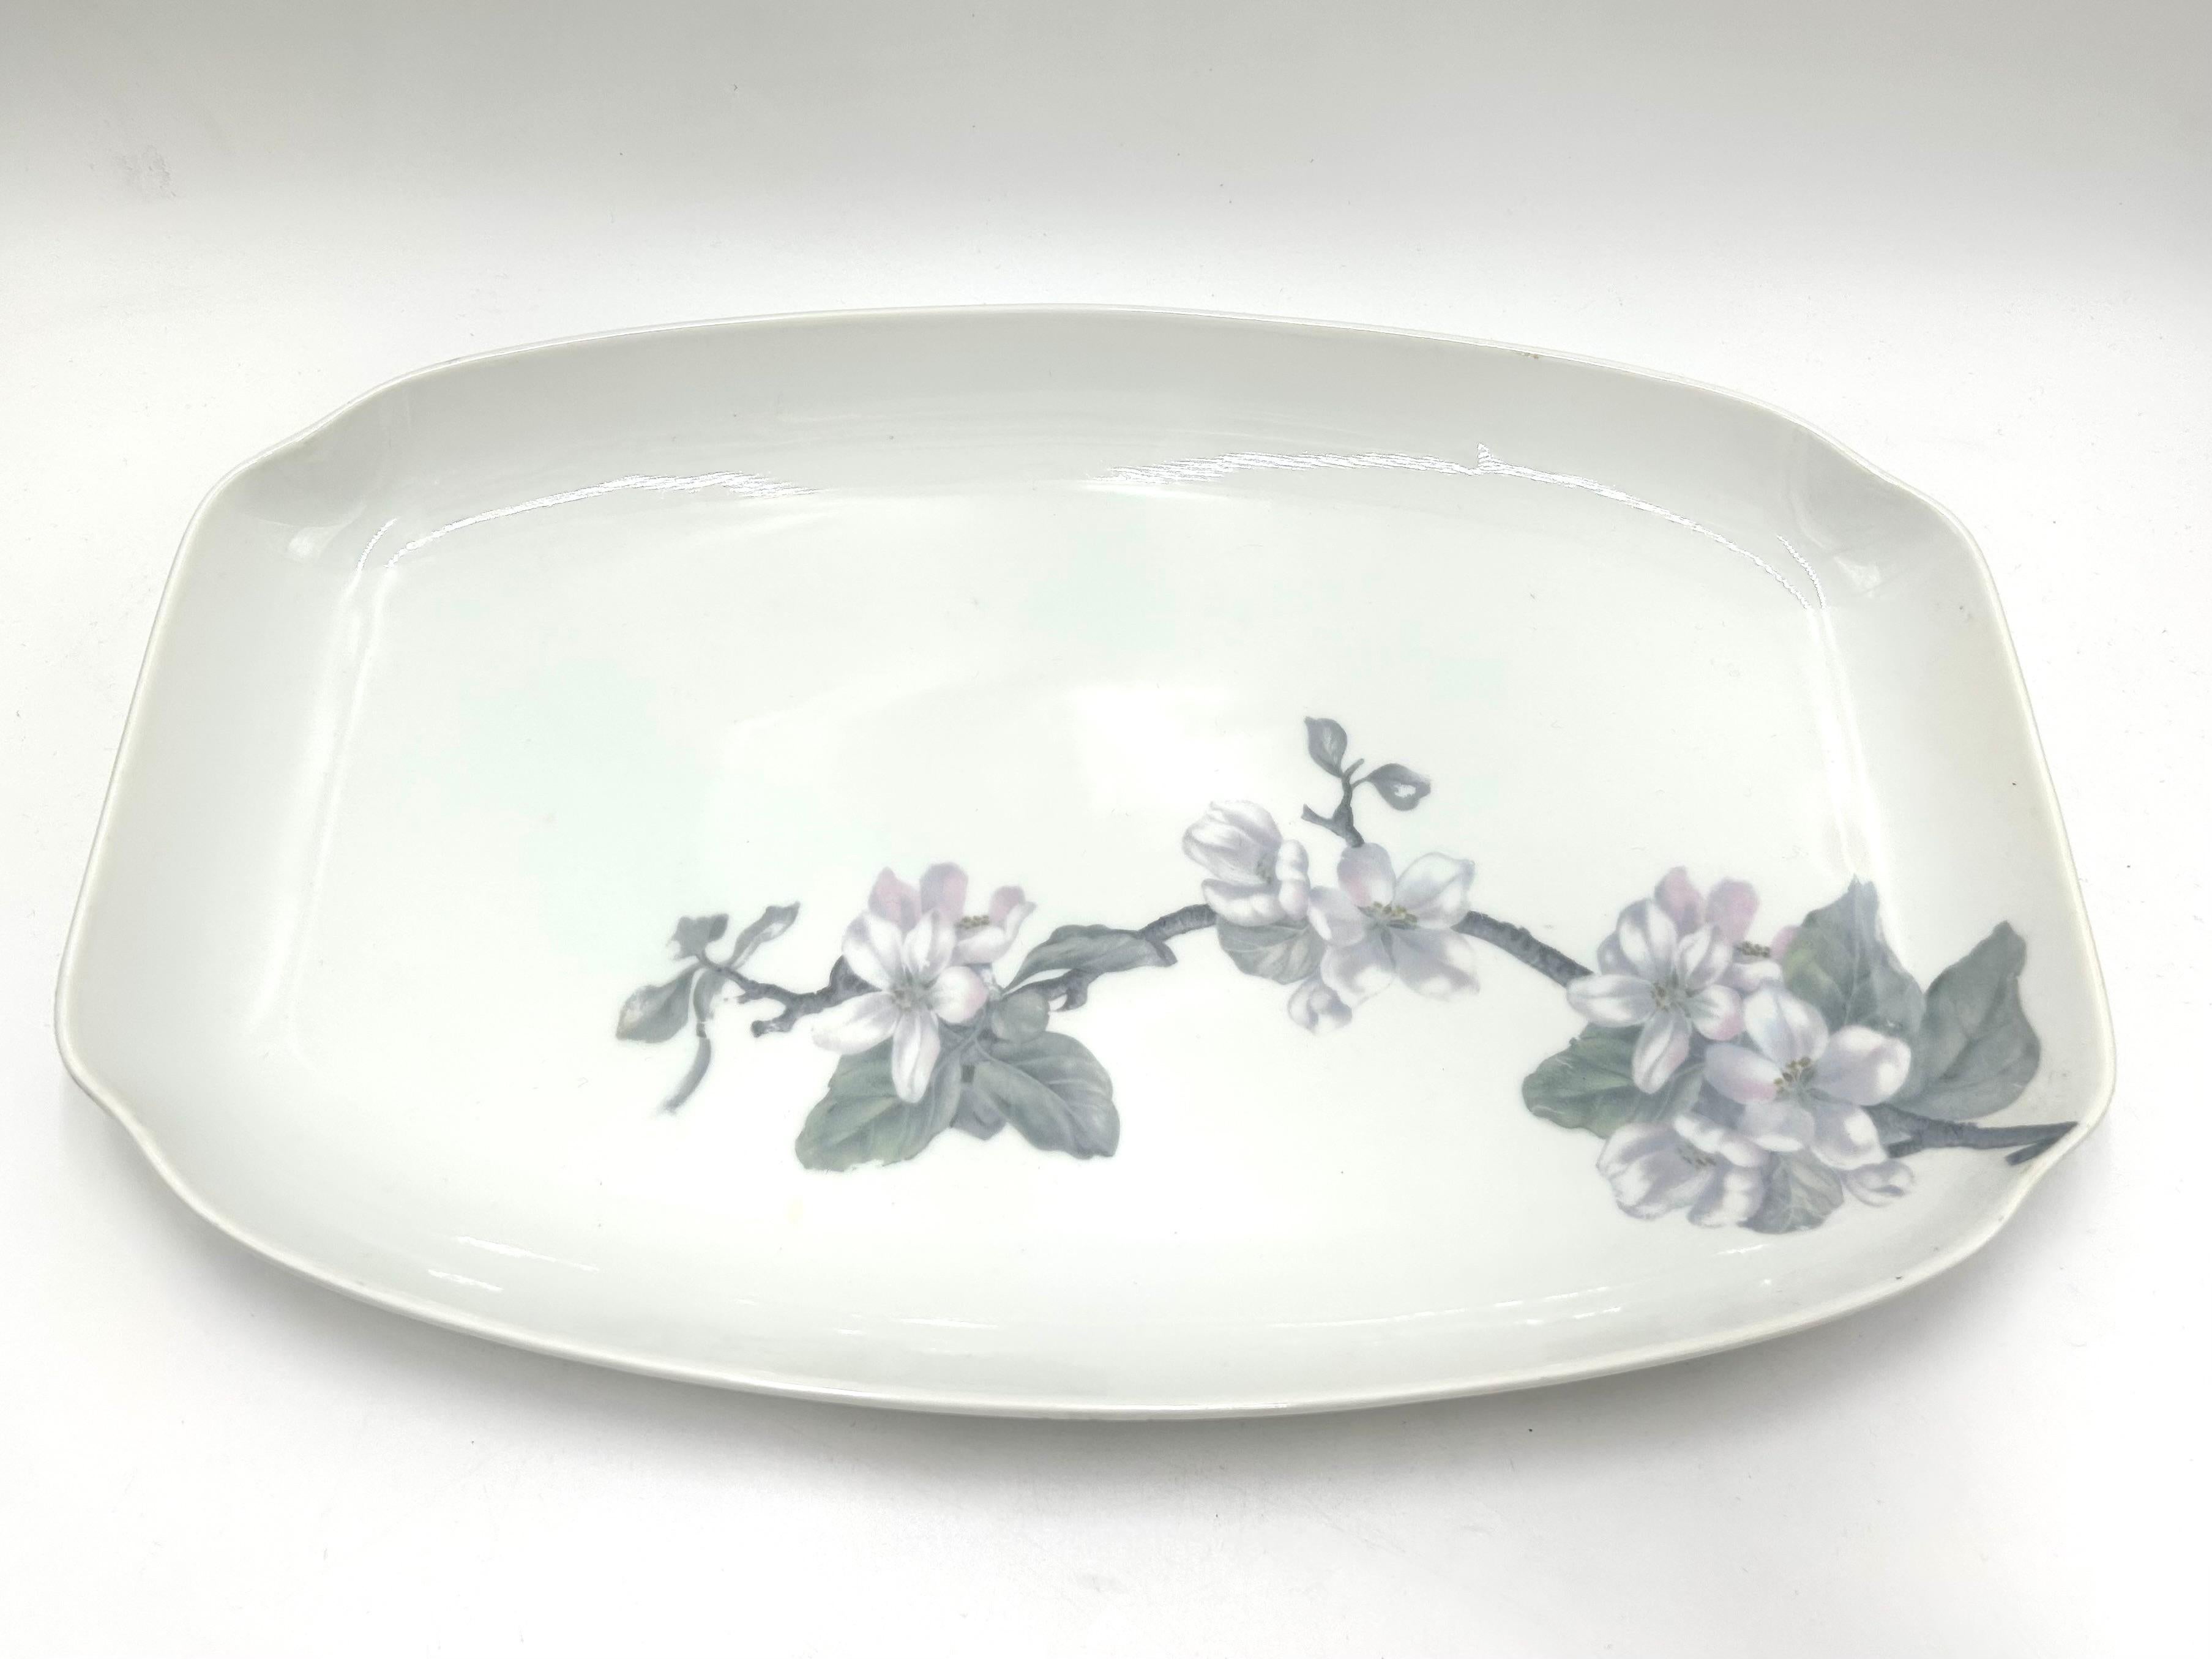 Beautiful large platter from the Hortense collection. Made of white porcelain by Rosenthal, in the branch in Kronach. Product marked with a green mark used in the years 1887-1904.

Very good condition, no defects.

Measures: Height: